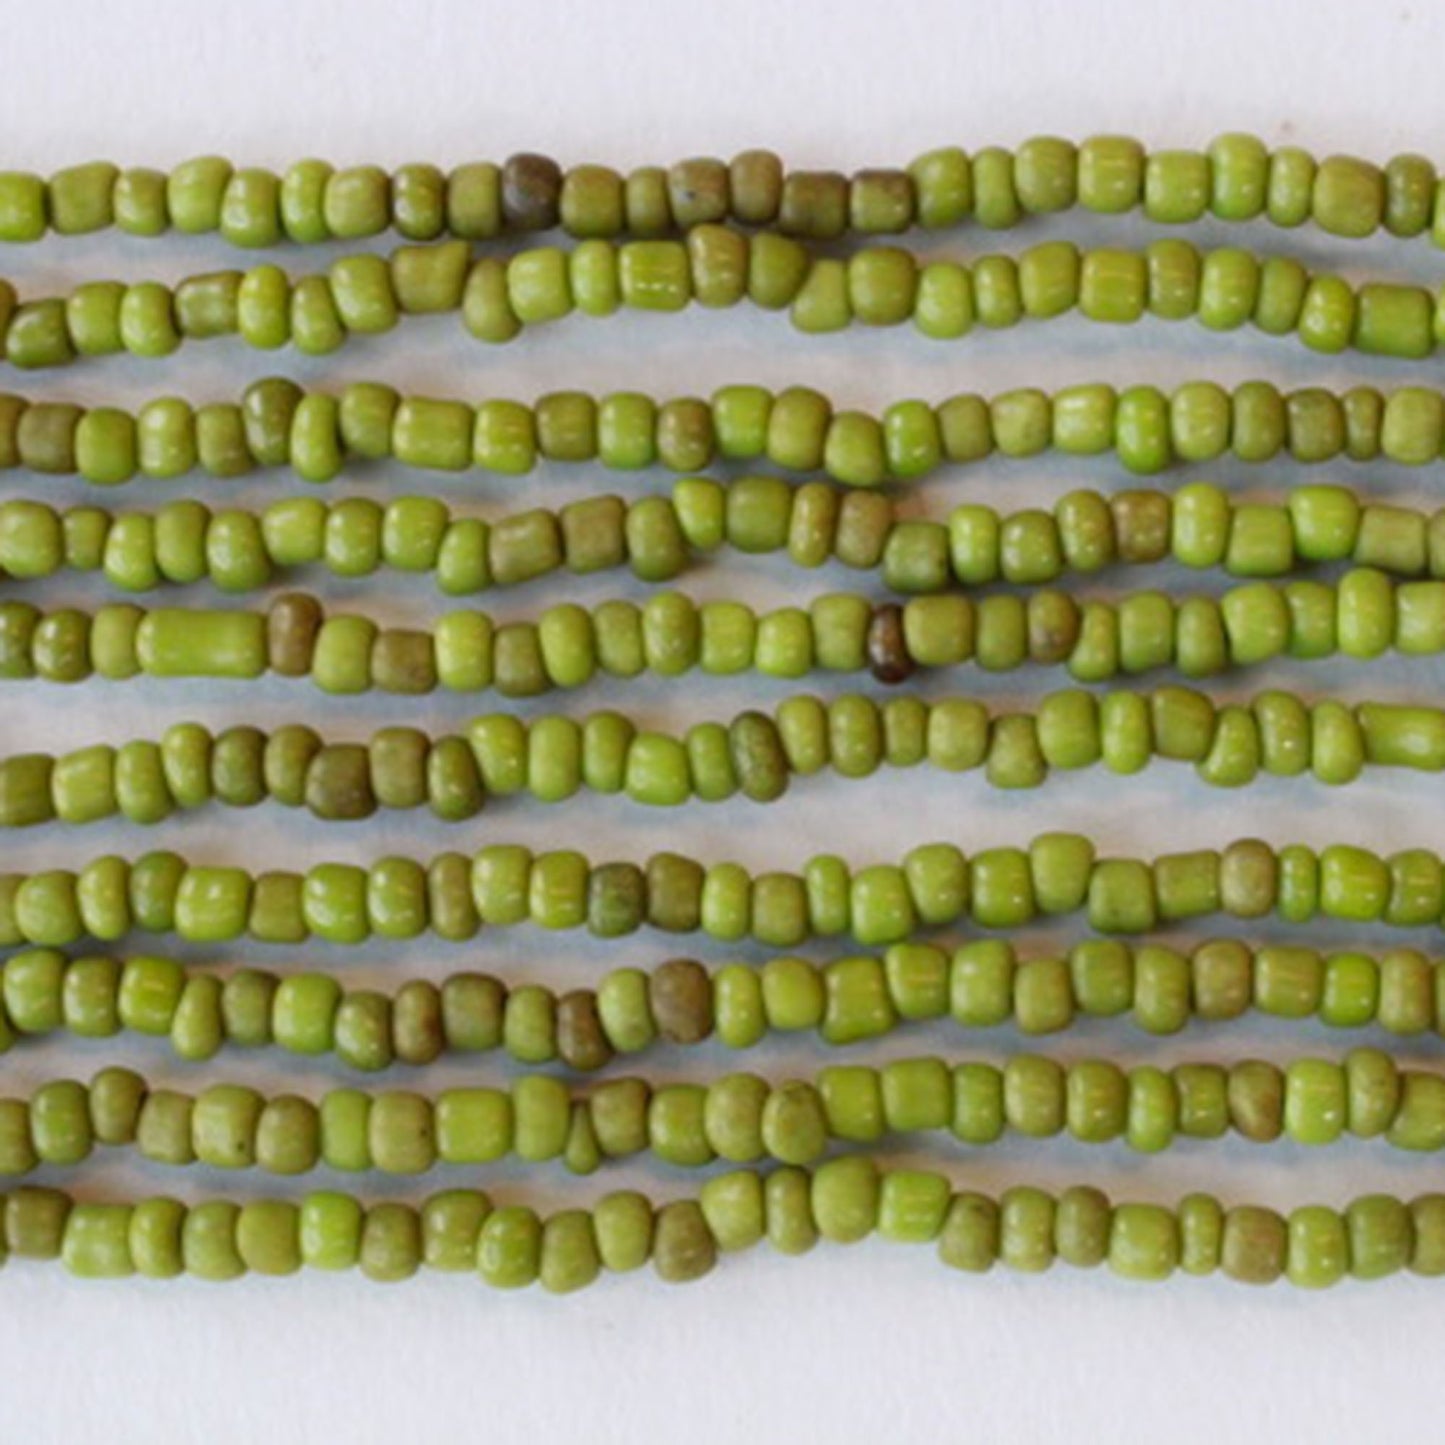 Rustic Indonesian Seed Beads - Olive - 42 inches